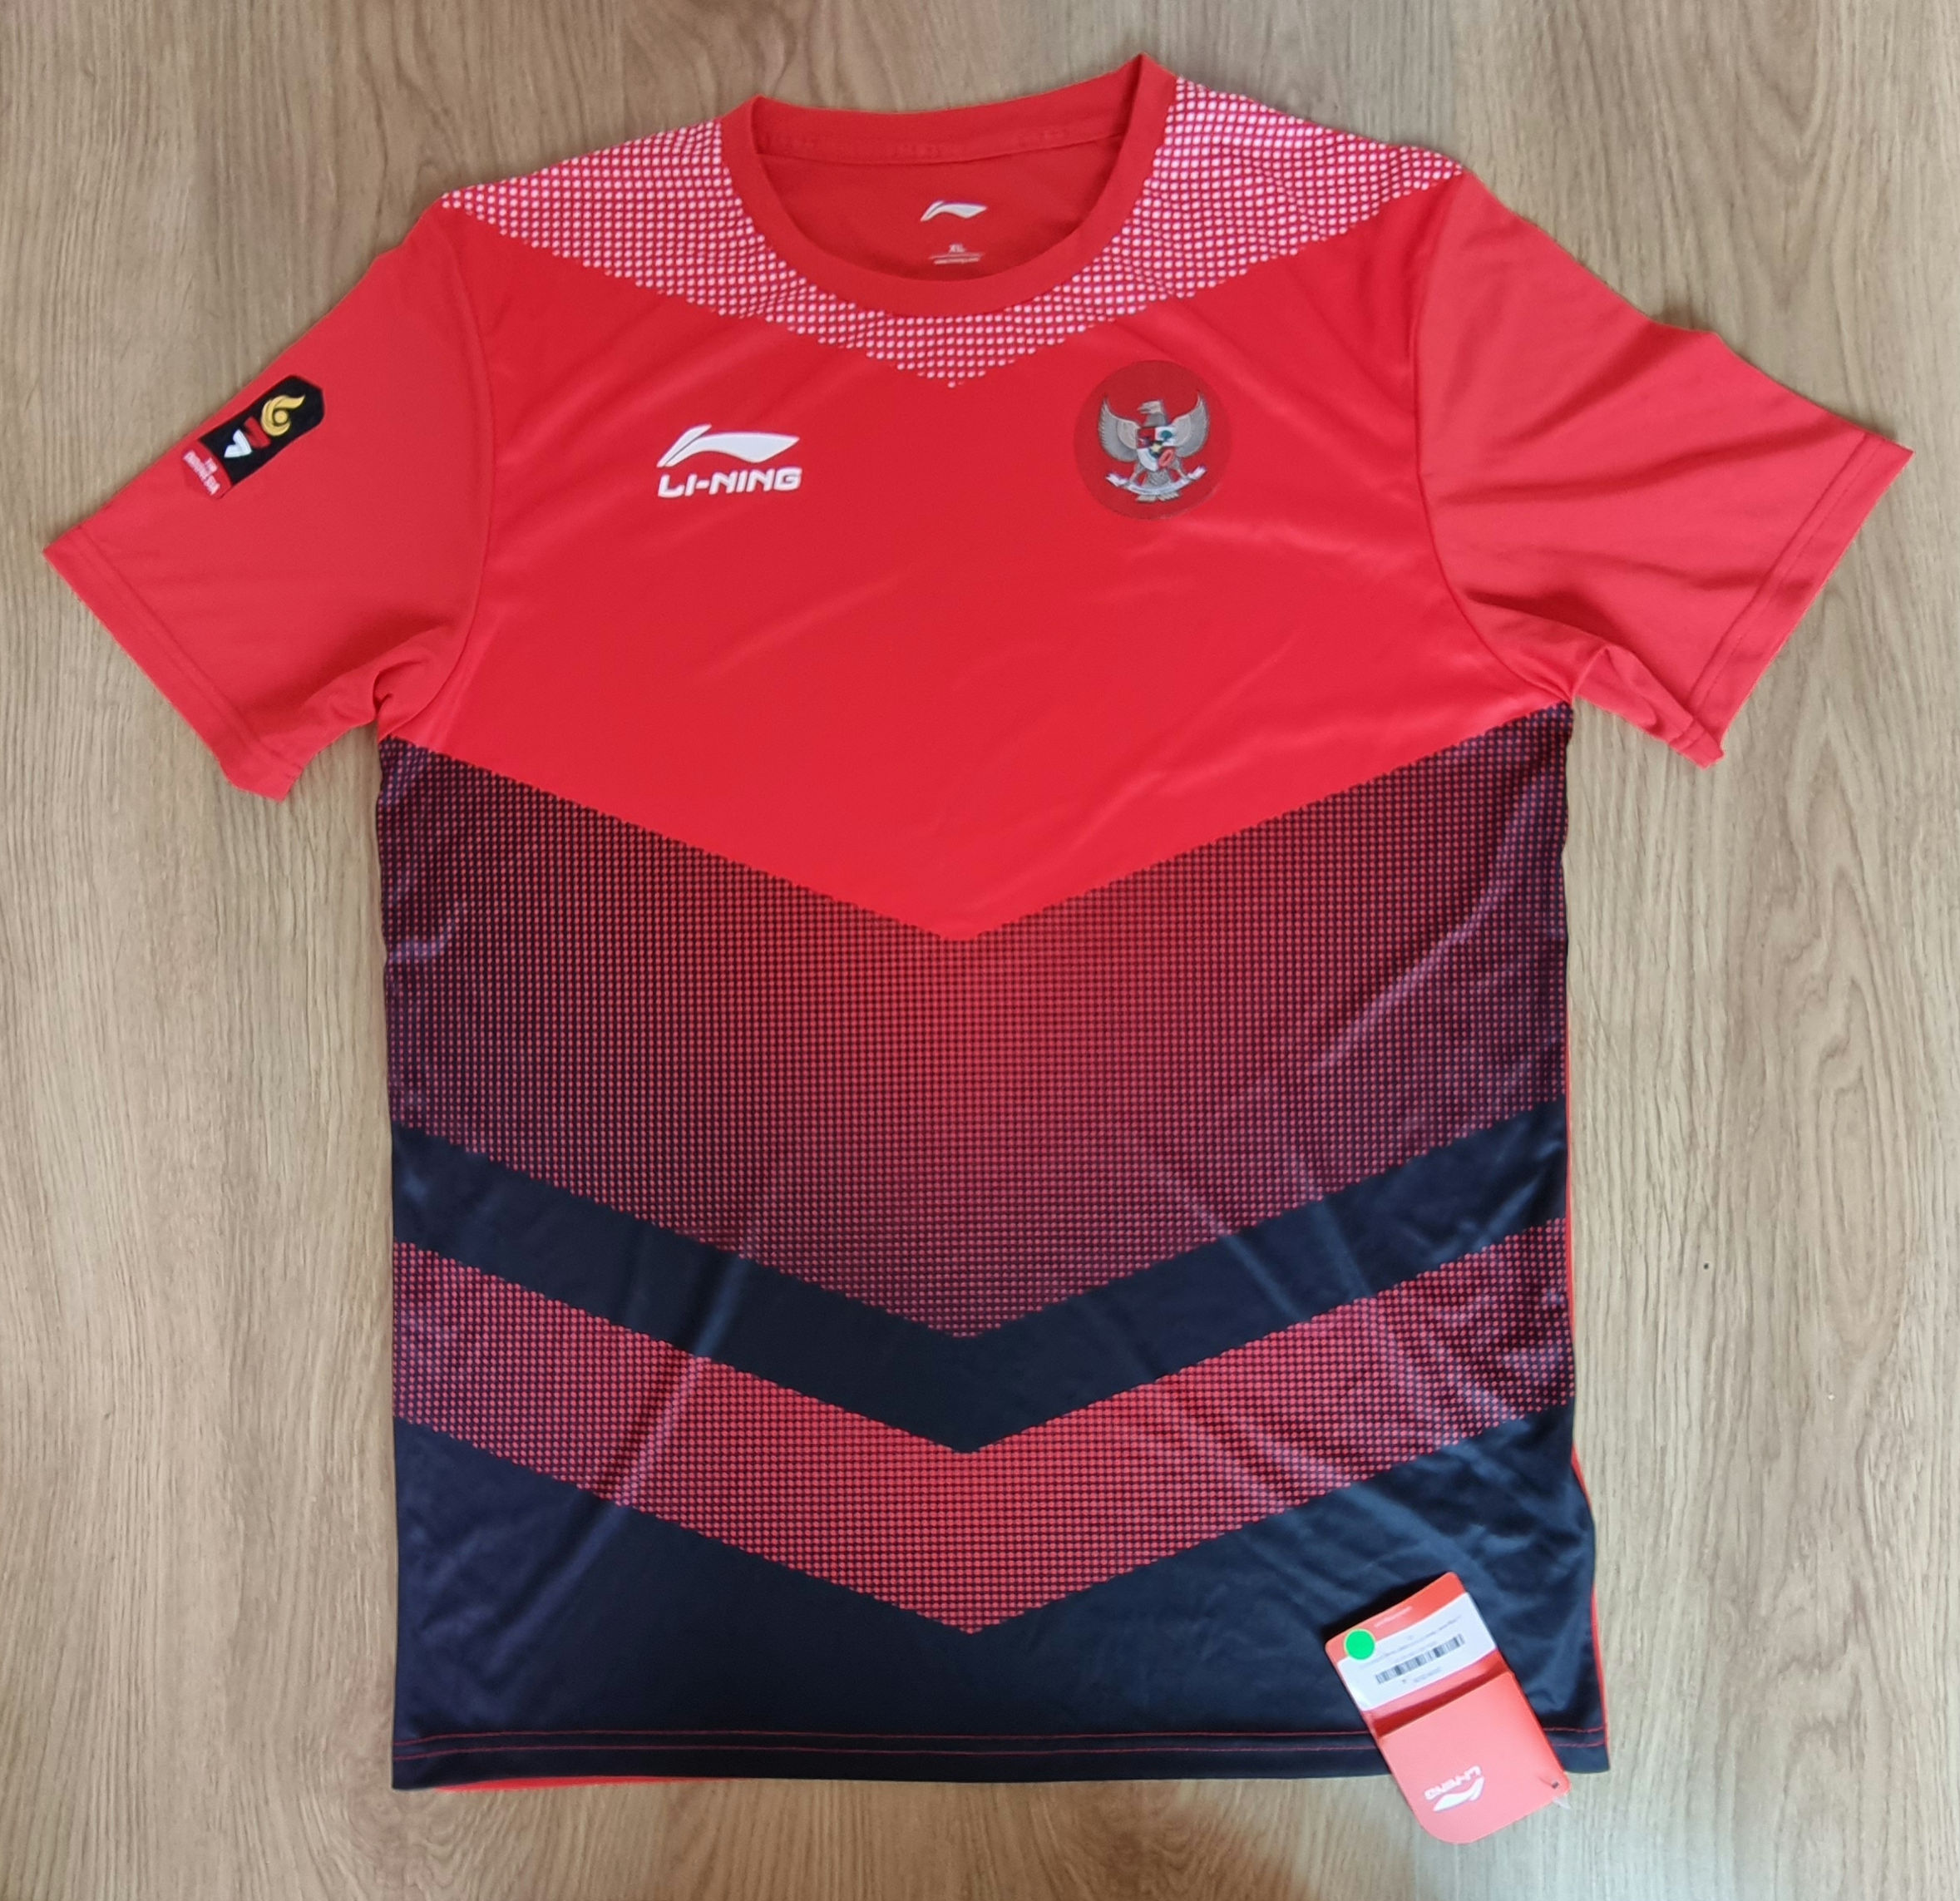 2018 Indonesia National Team Football Soccer Authentic Genuine Nike Jersey Shirt Red